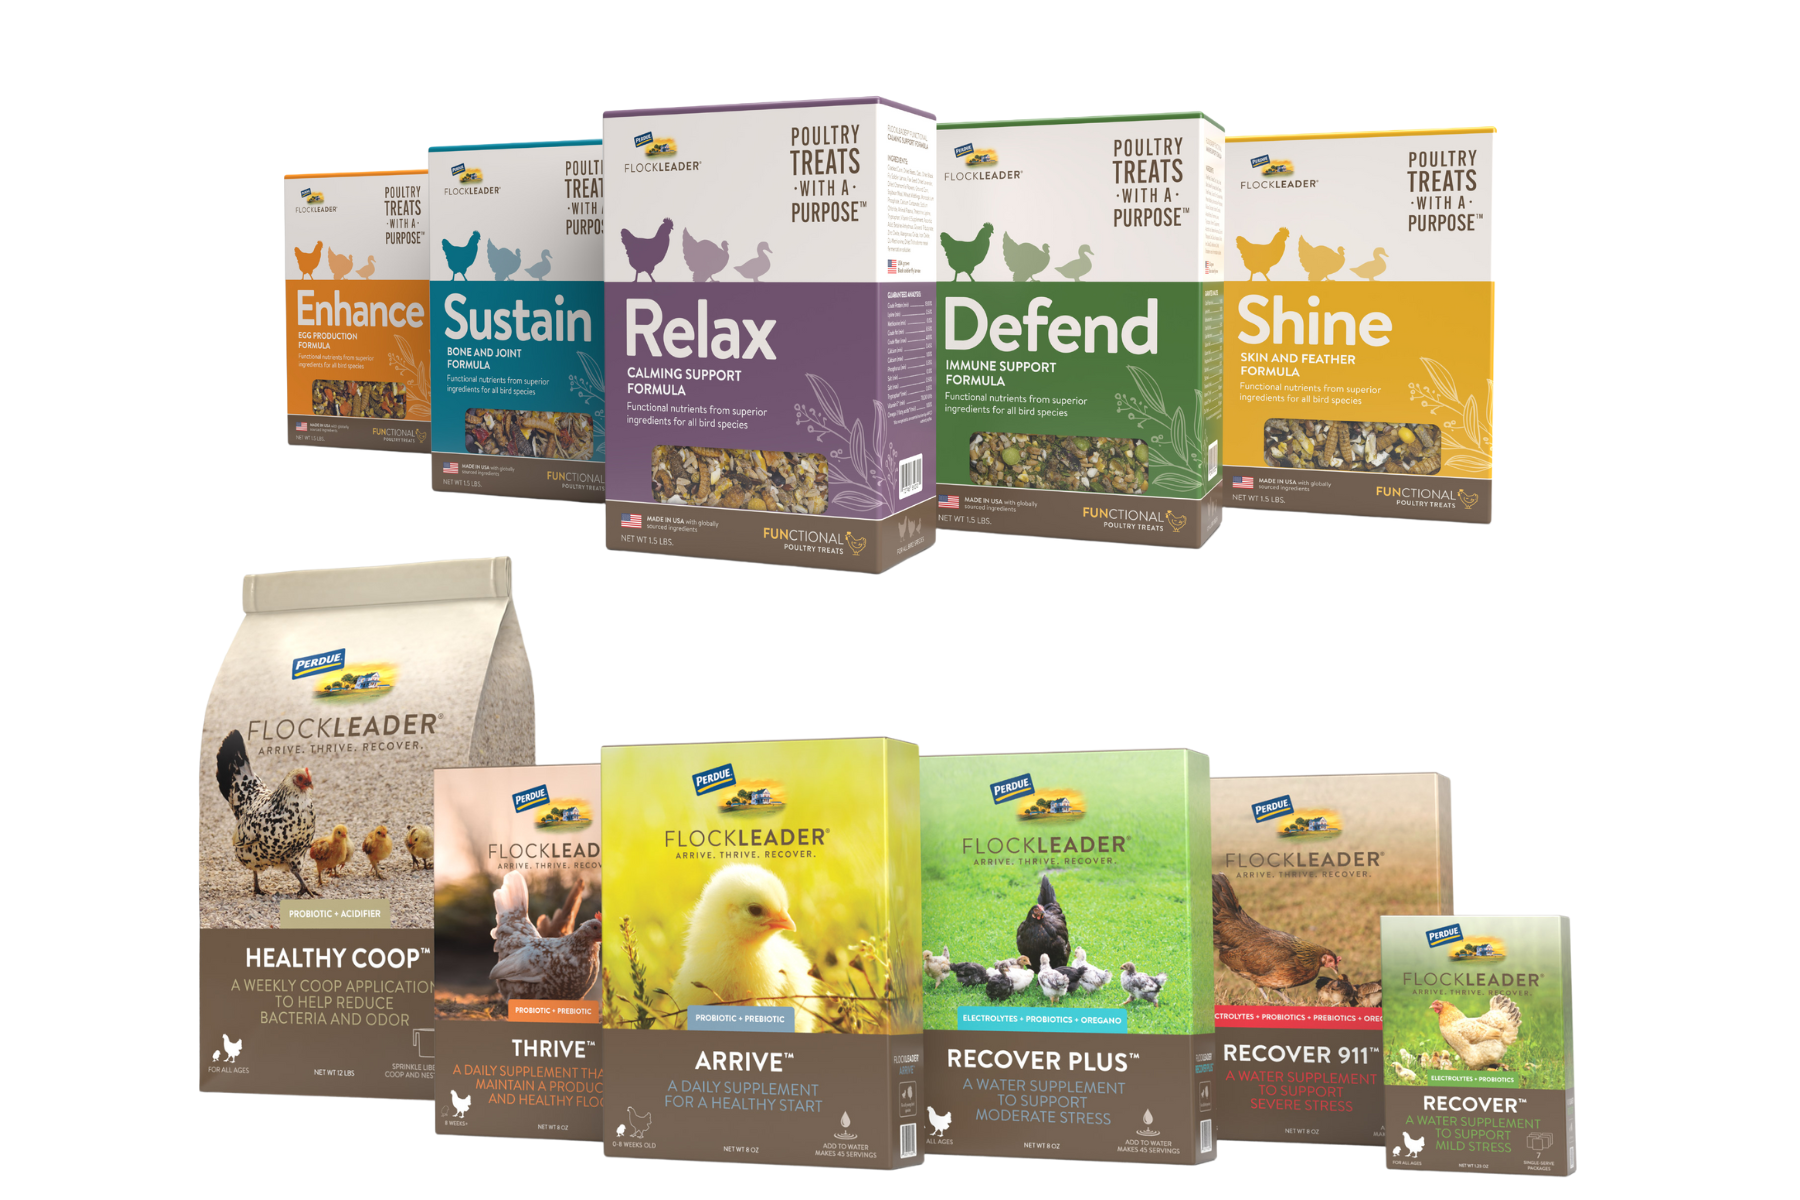 An image of 10 different Perdue FlockLeader packages on a white background.